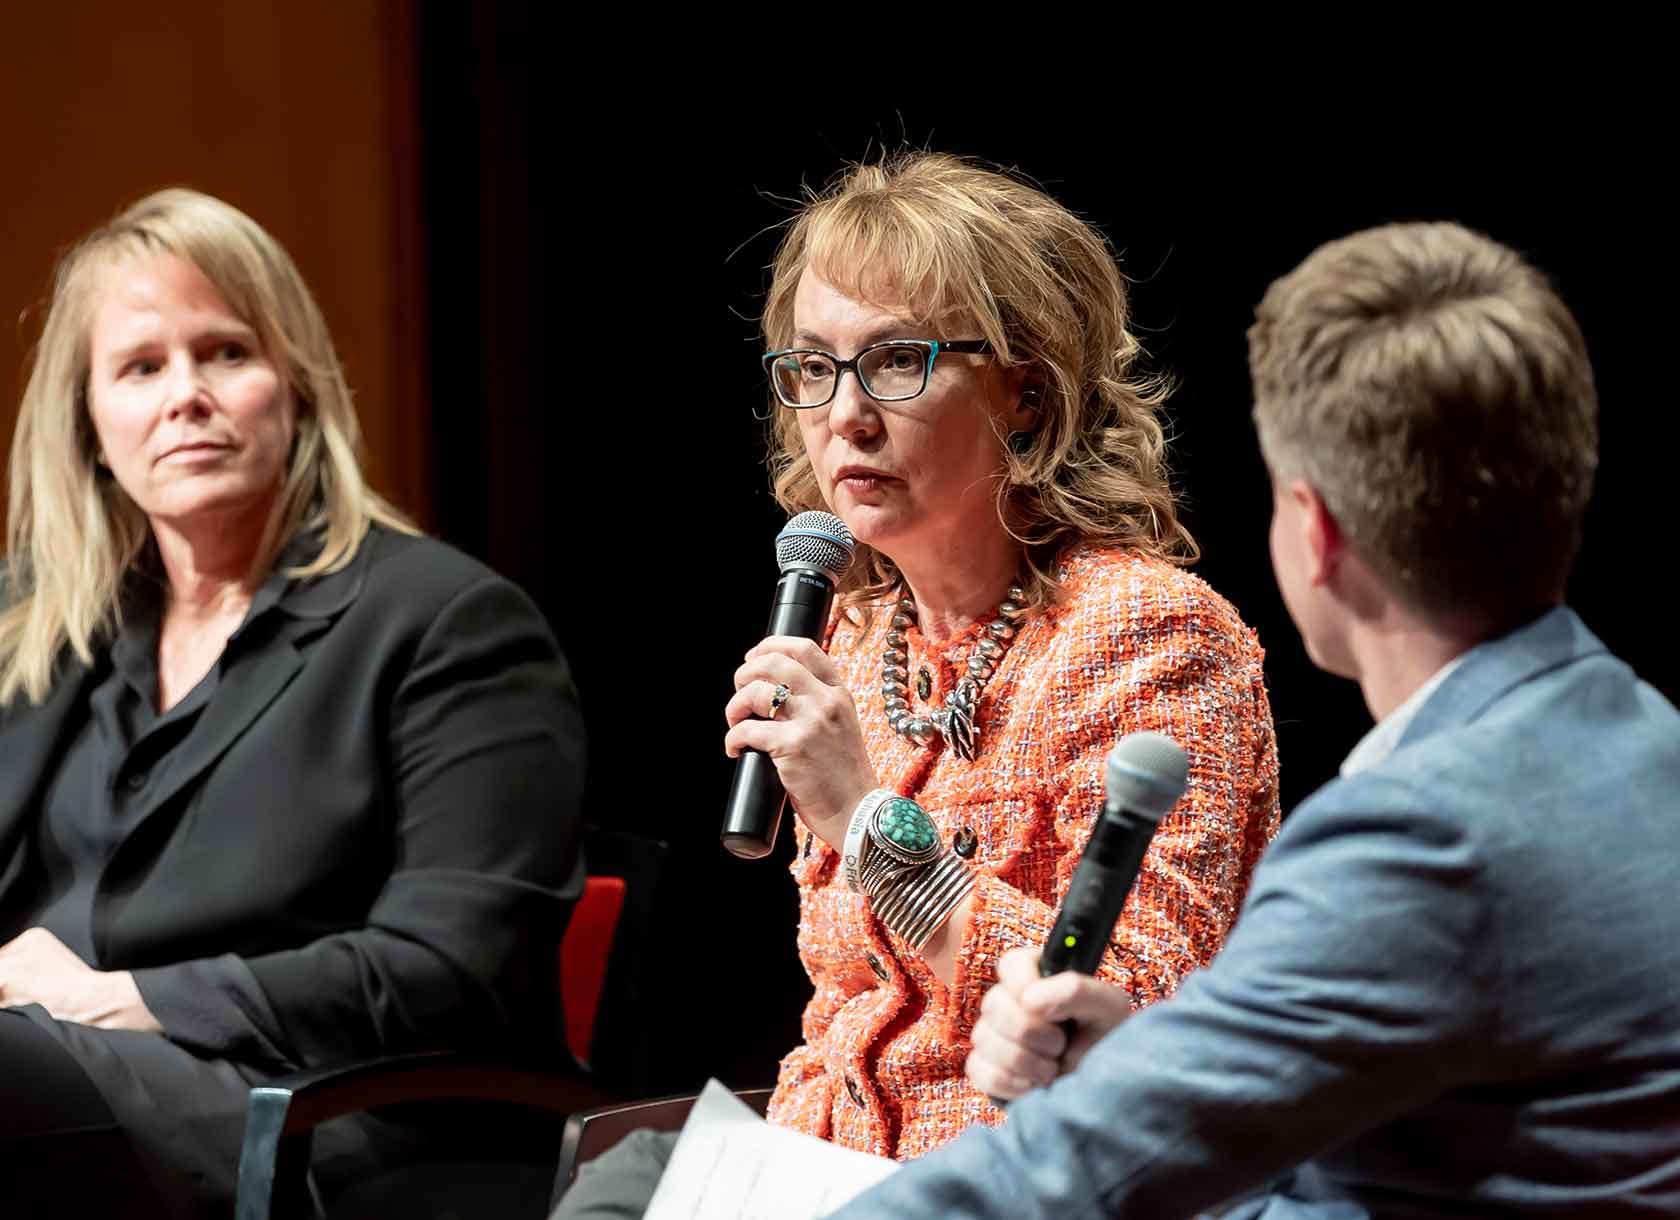 Gabby Giffords '93 speaks at Scripps College in February 2023